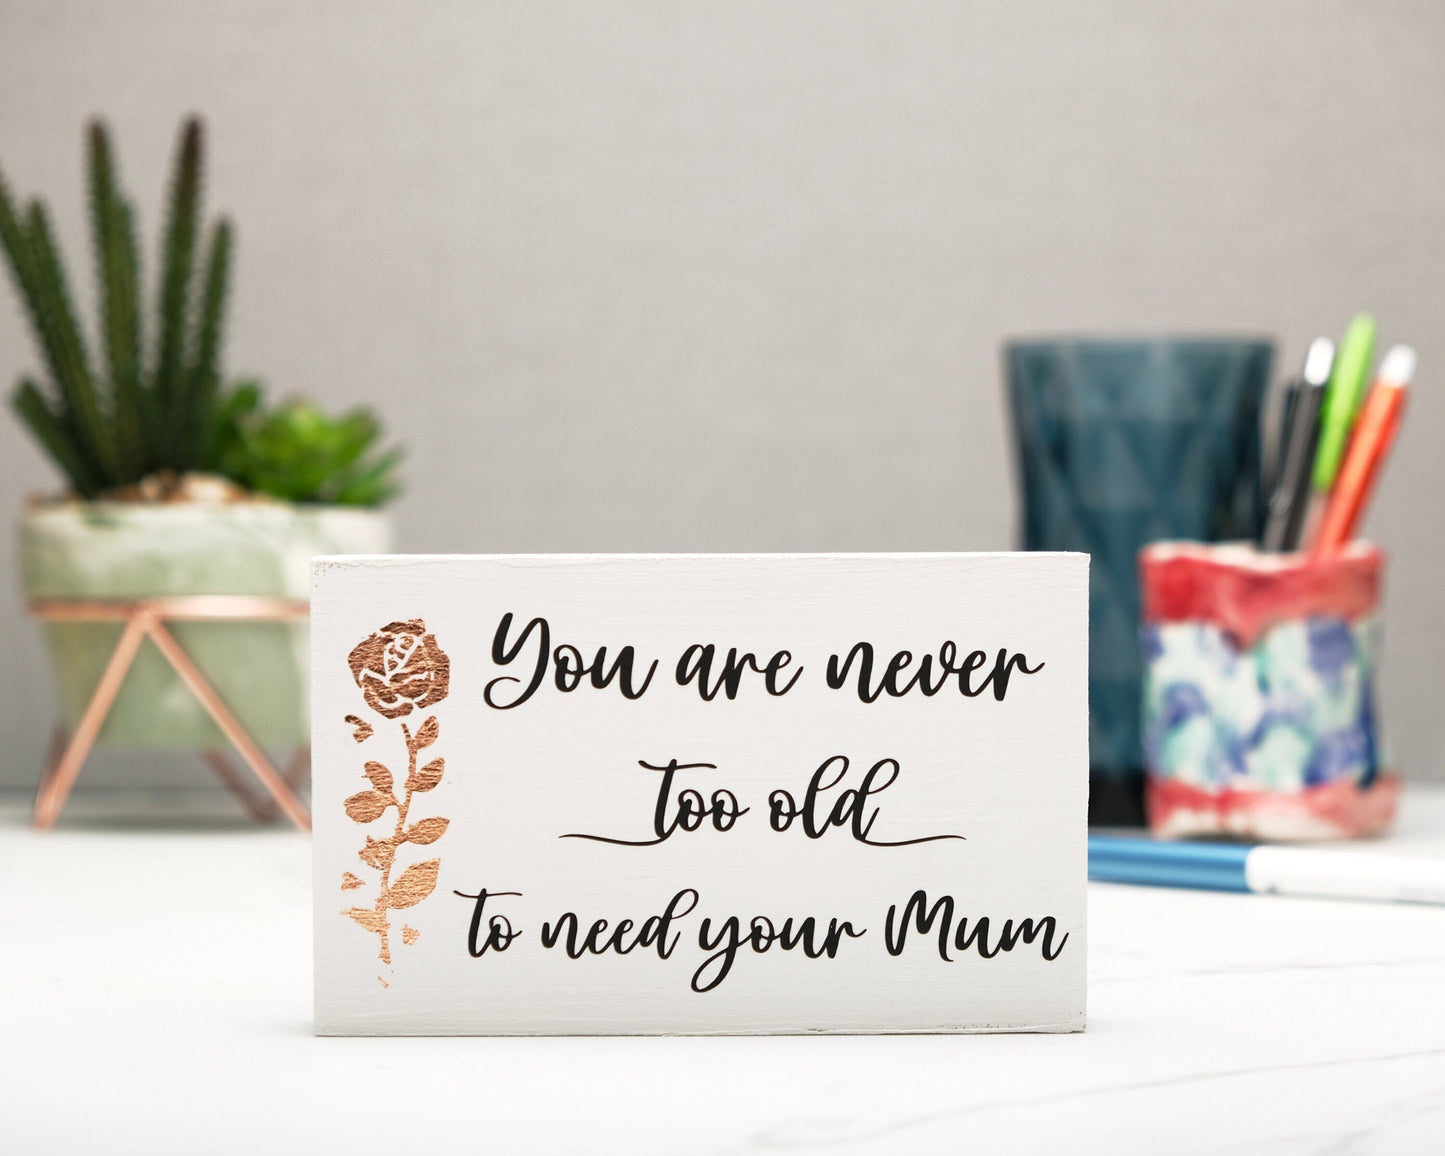 Small freestanding rectangular wooden sign facing straight on. White wood stain with bronze rose gold tall rose flower on left side. Black message in emotive font, You are never too old to need your Mum. Plant and pen pot out of focus in background.